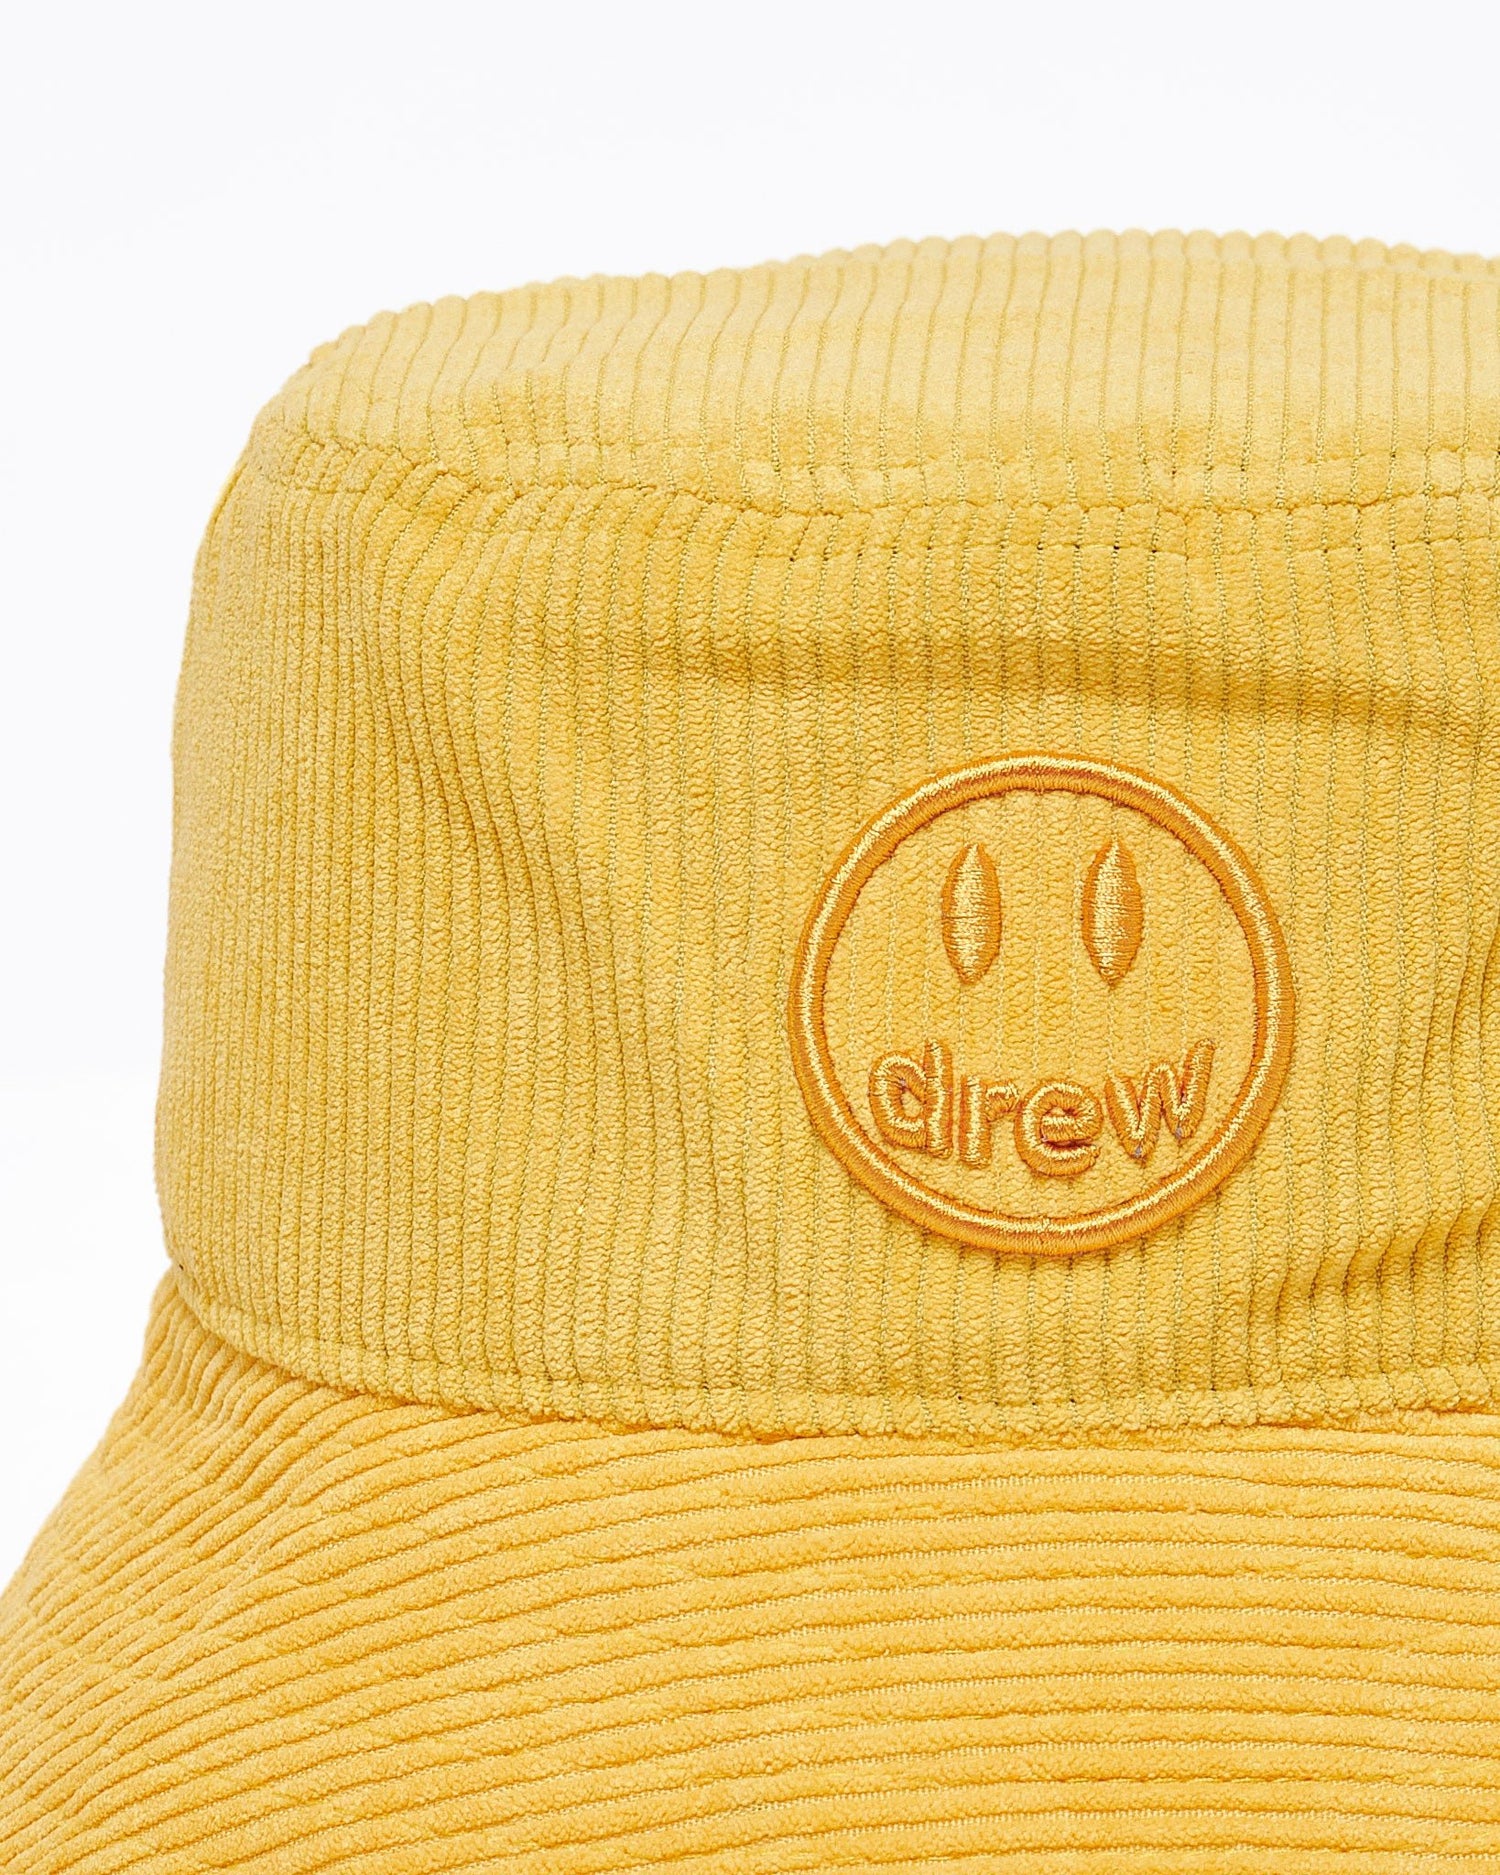 MOI OUTFIT-Drew Smiling Bucket Hat 9.90